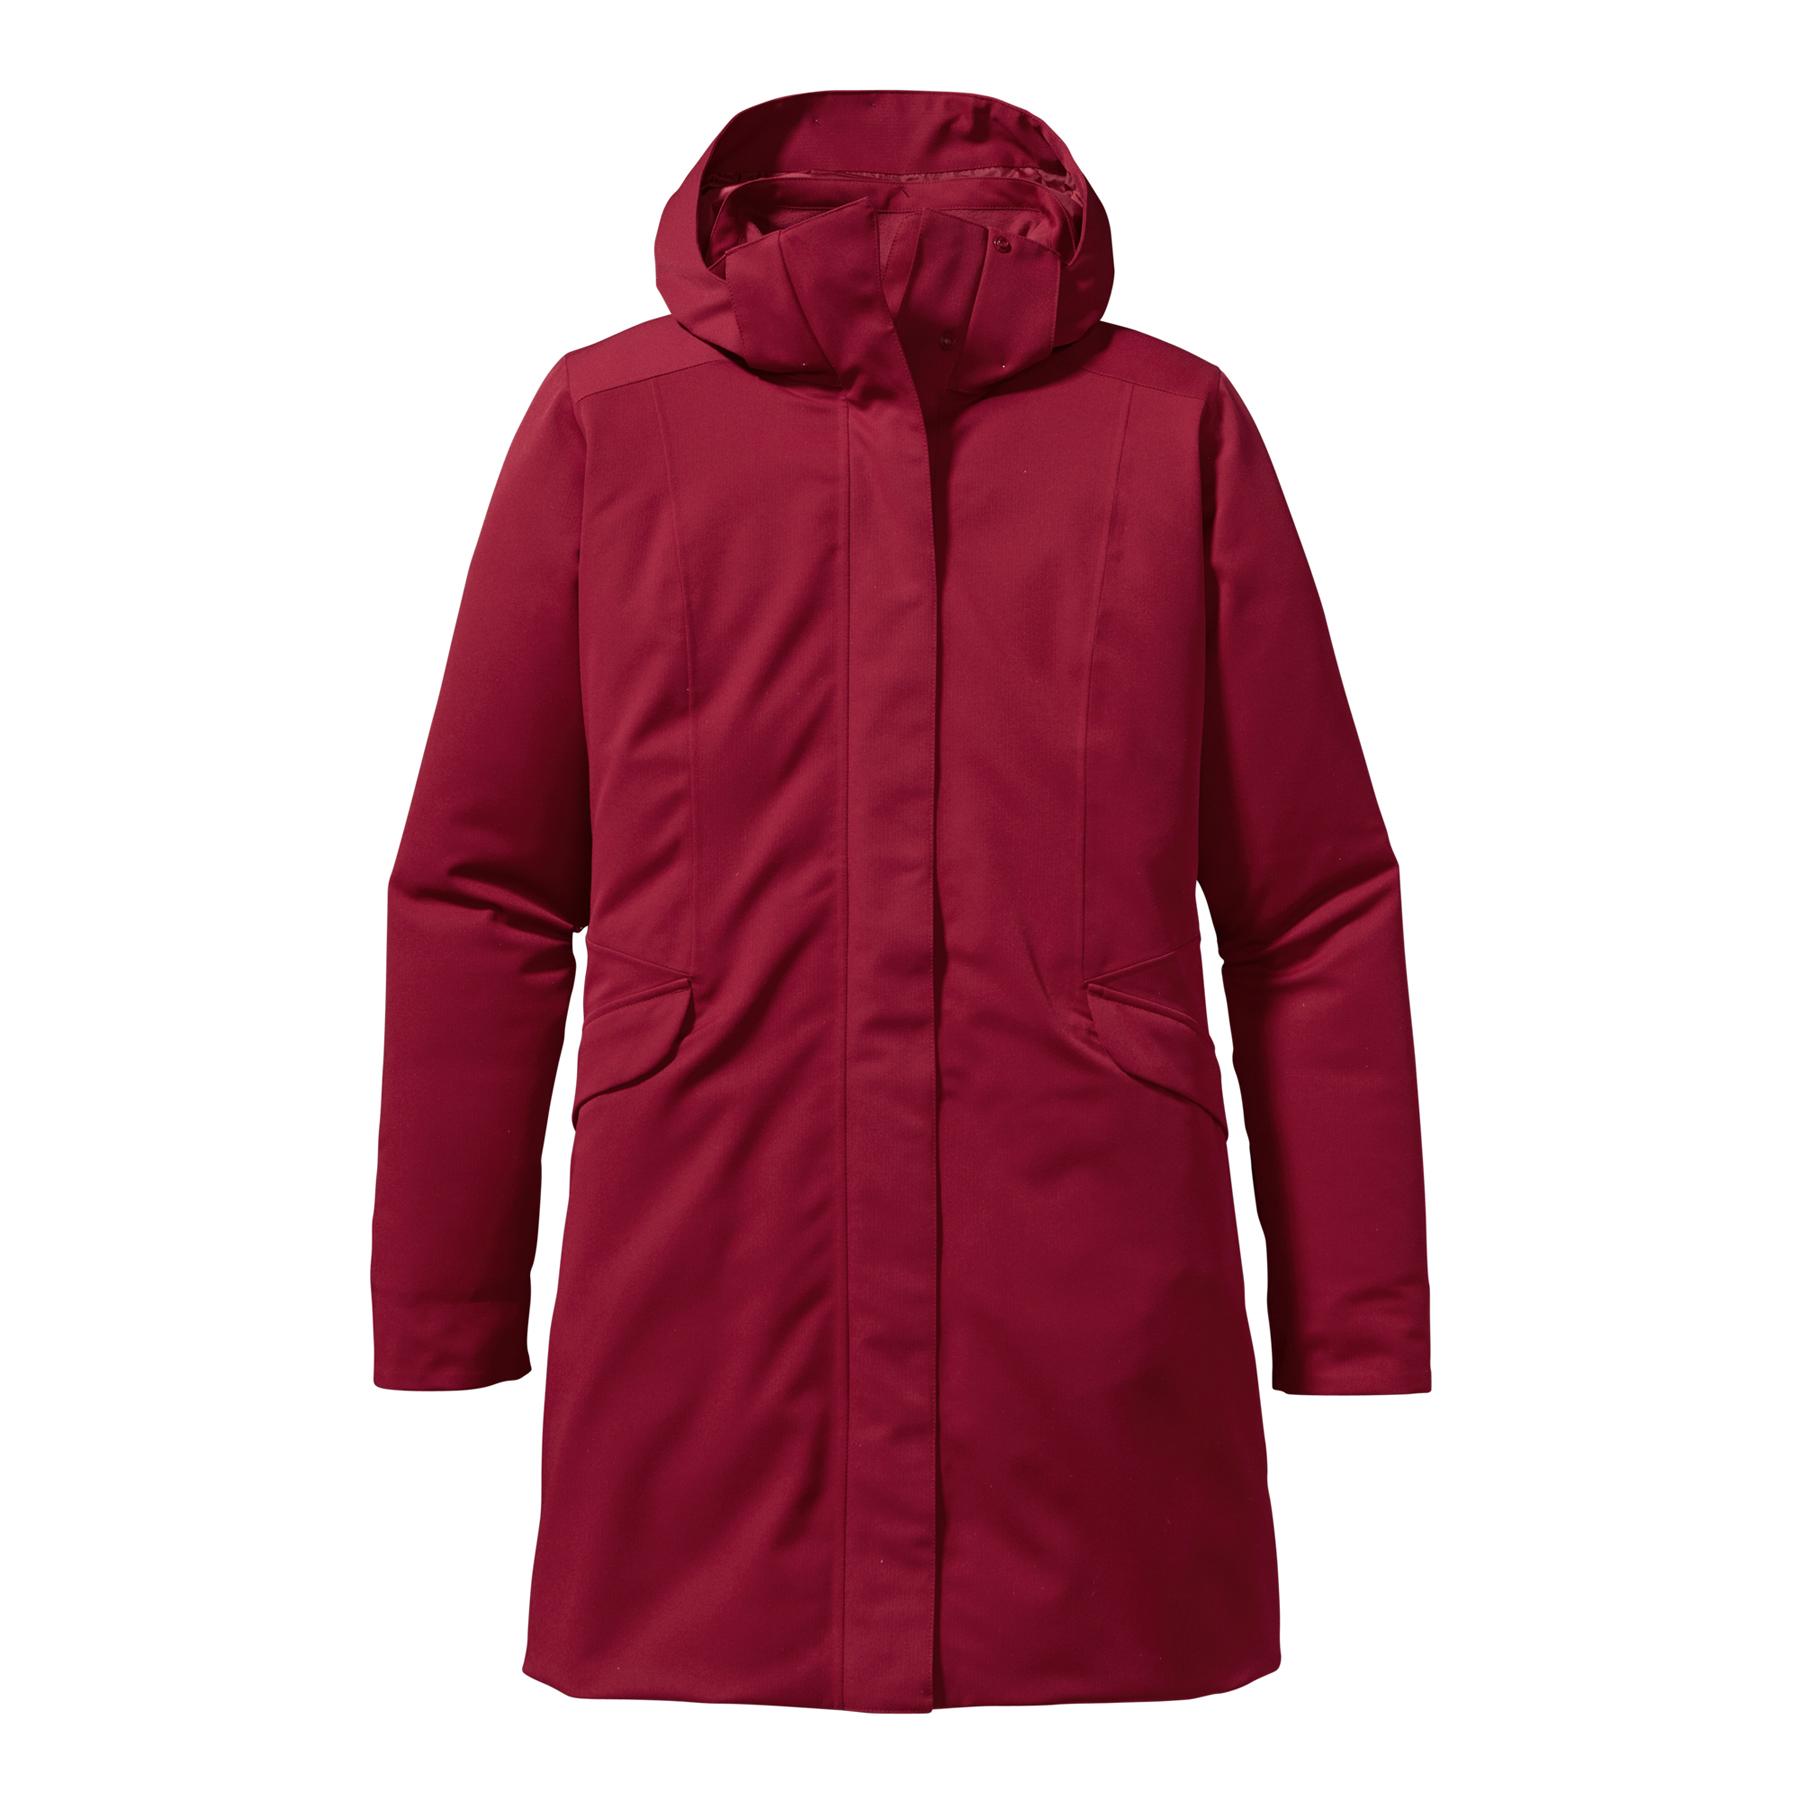 Foto Patagonia Duete Parka Lady Wax Red (Modell 2013/2014)